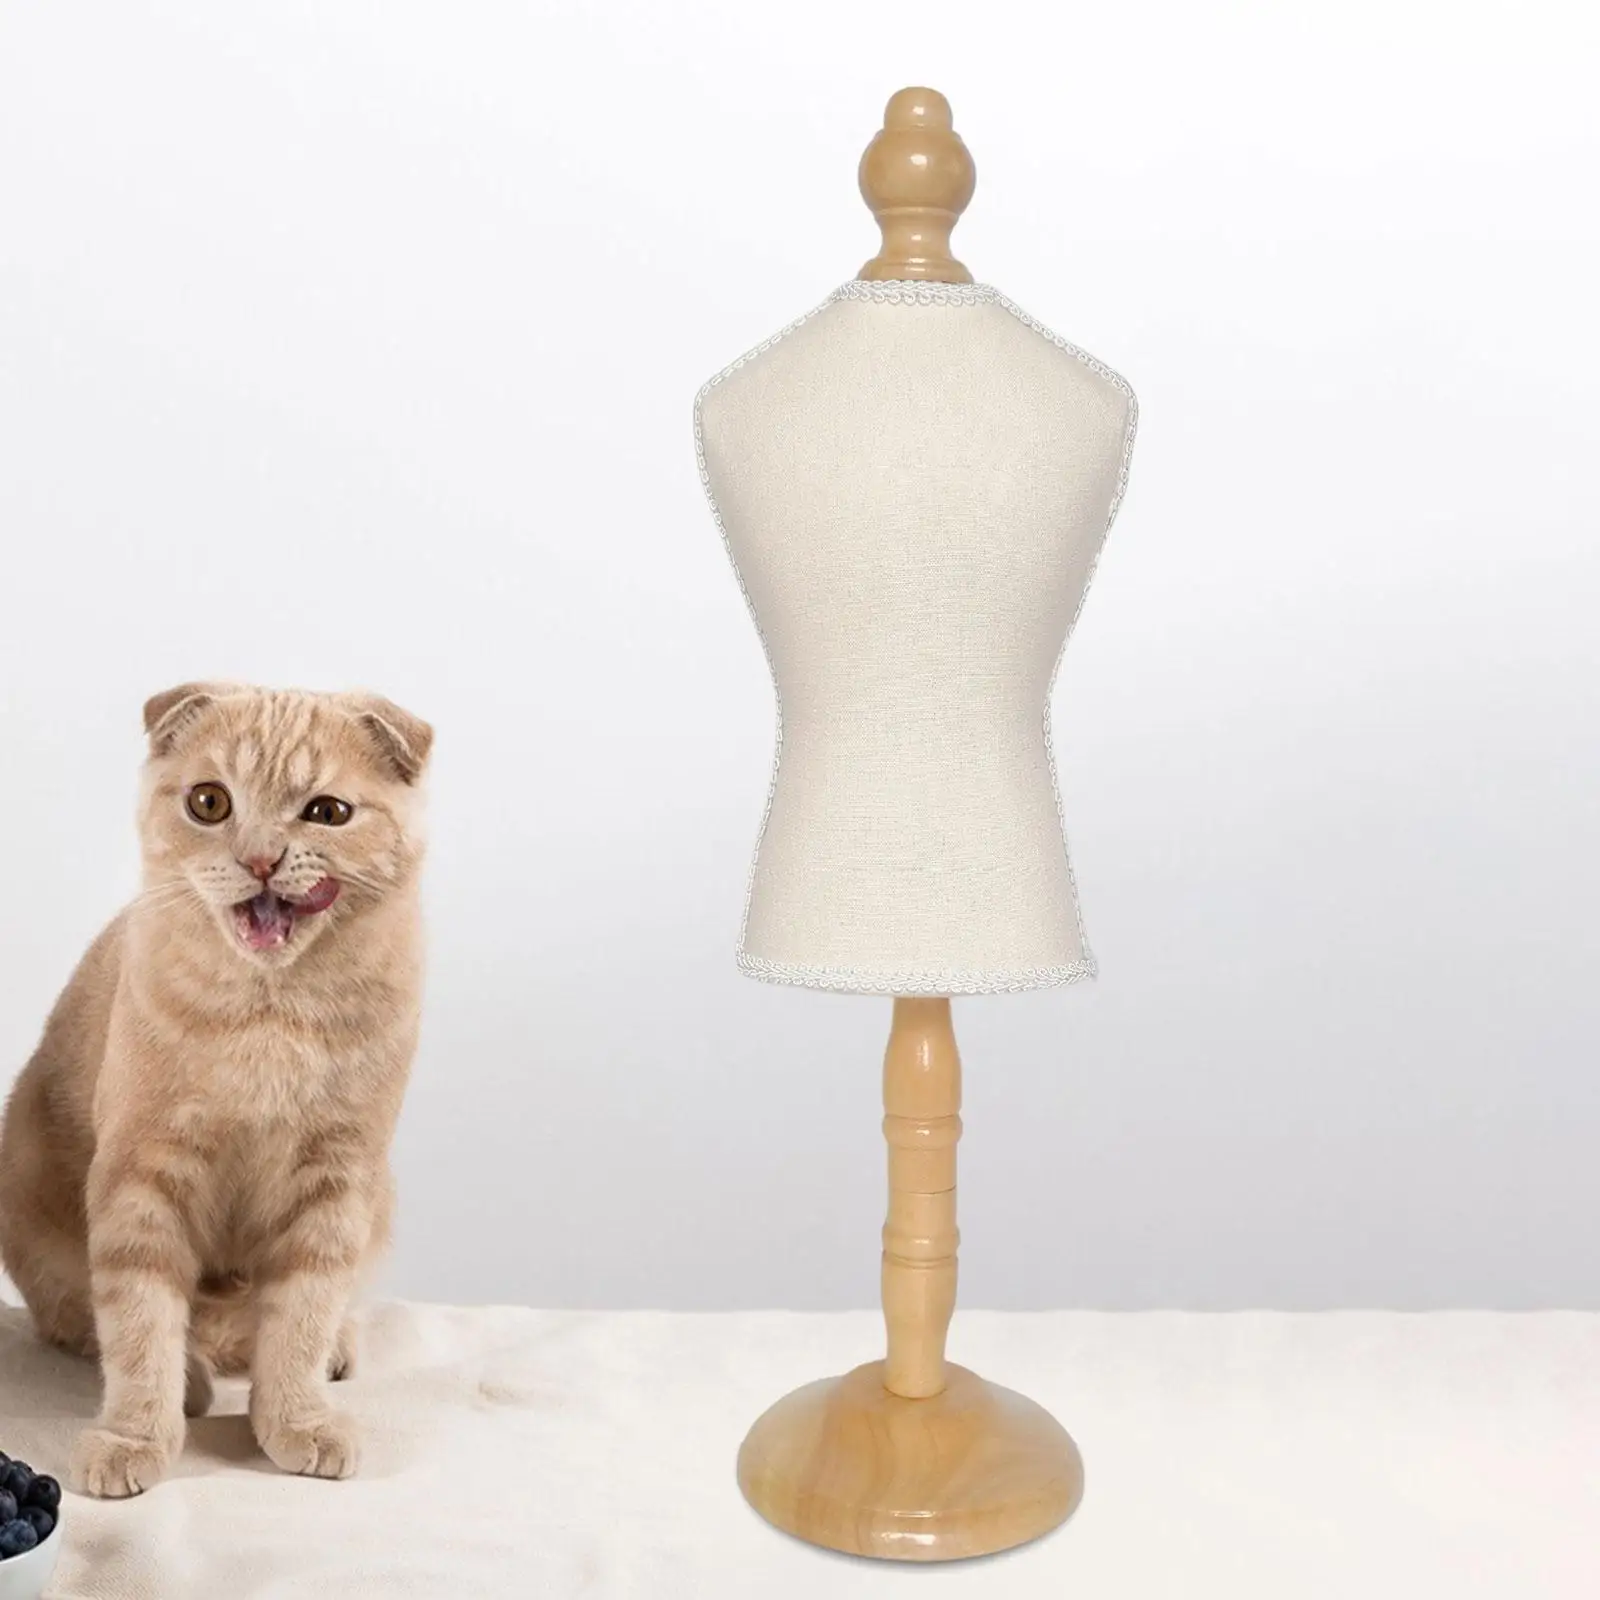 Dog Dress Form Mannequin Stand Pet Dress Display for Miniature Sewing Dress